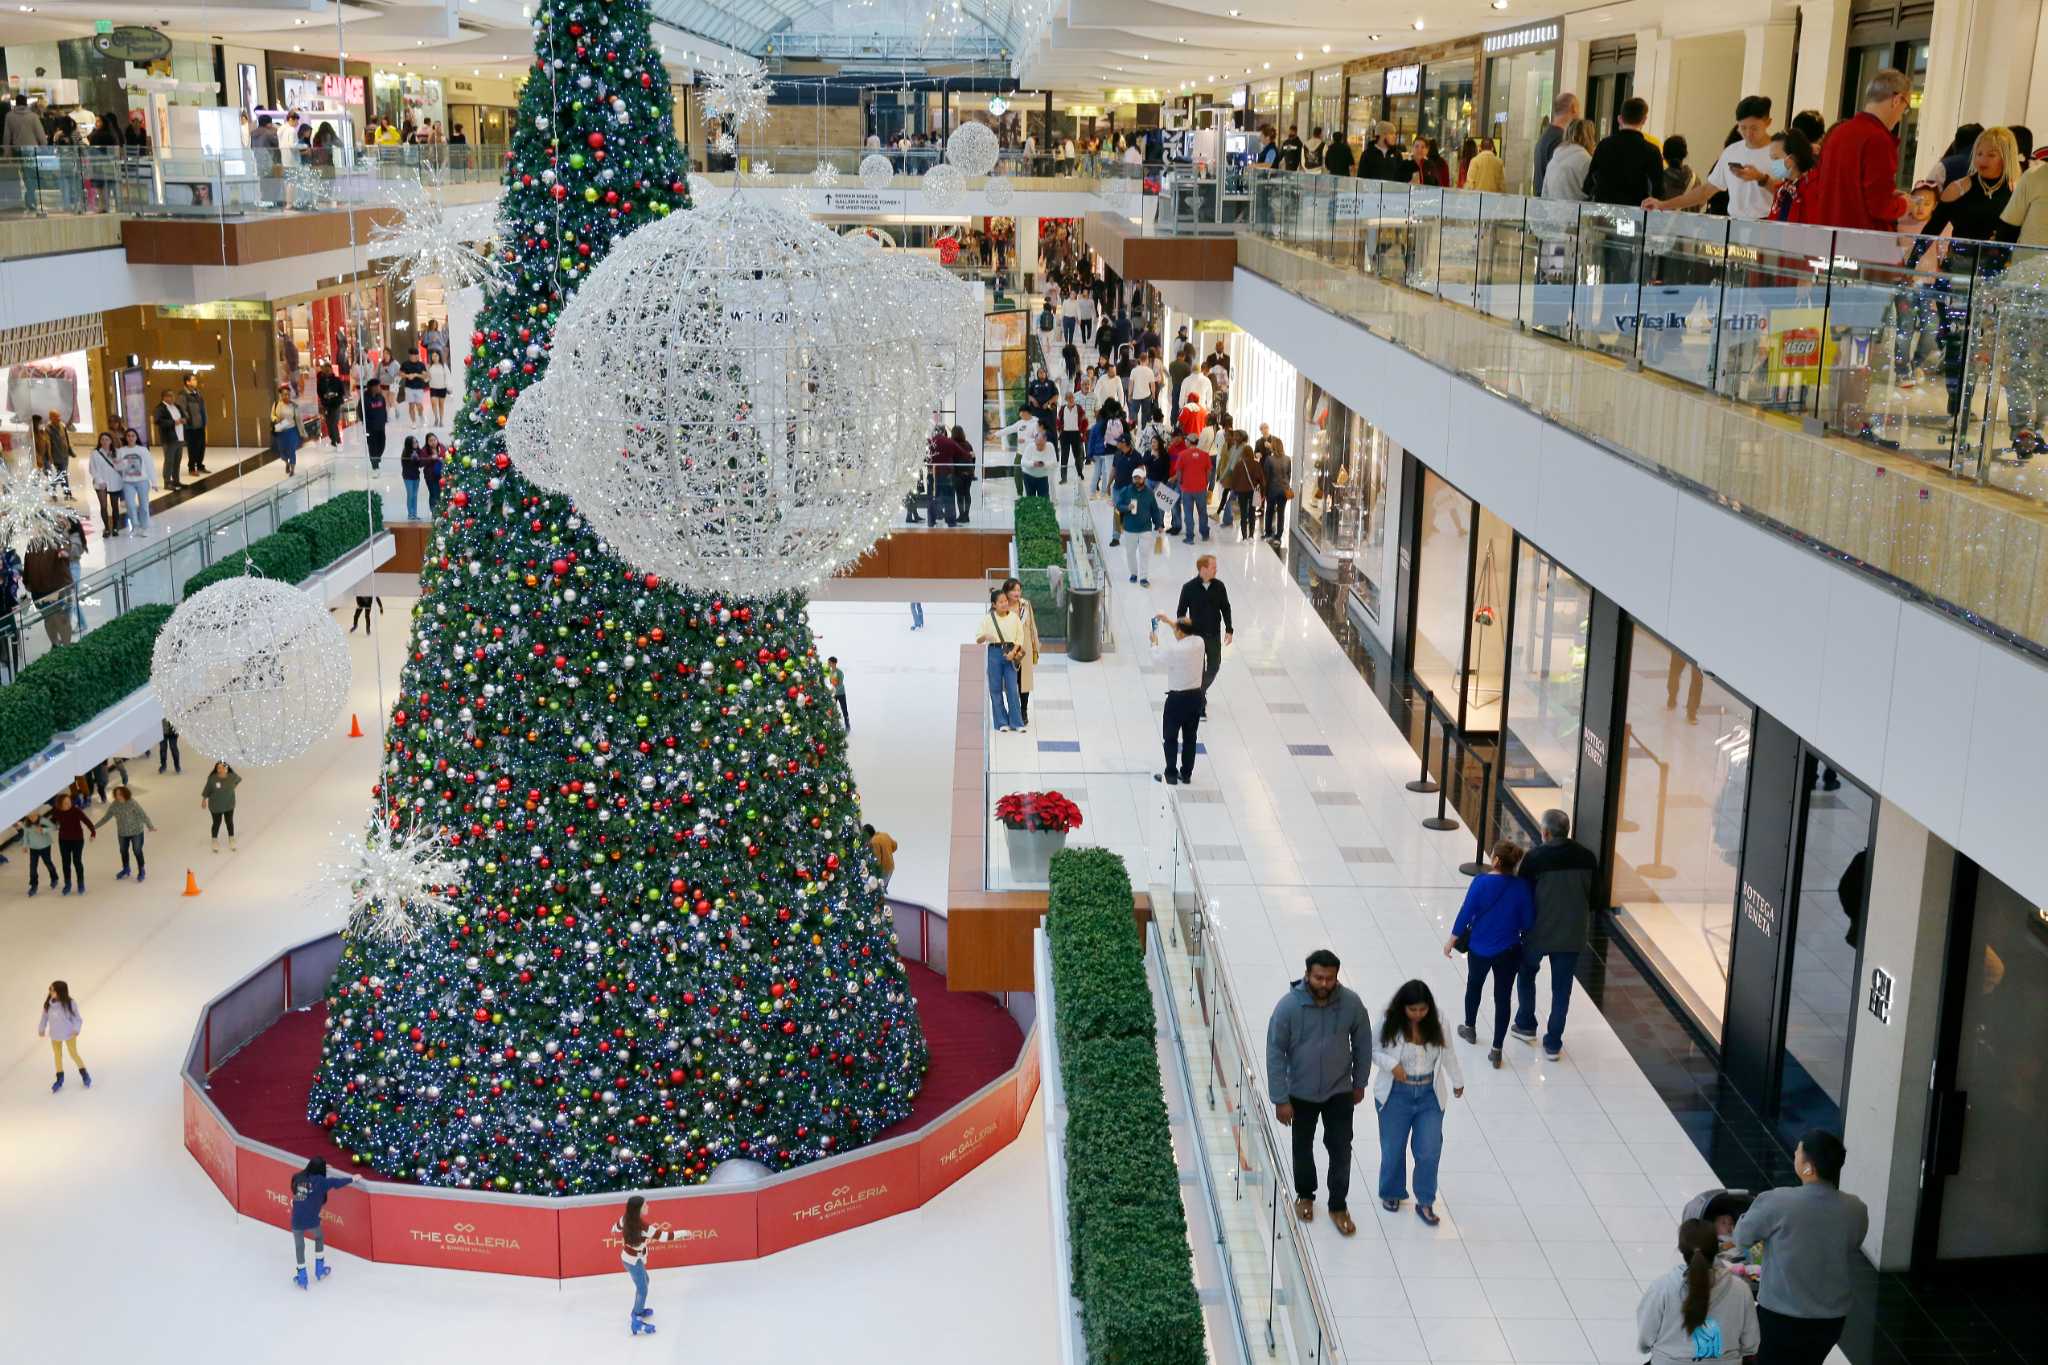 Galleria offers buy in store, deliver to home service for holidays